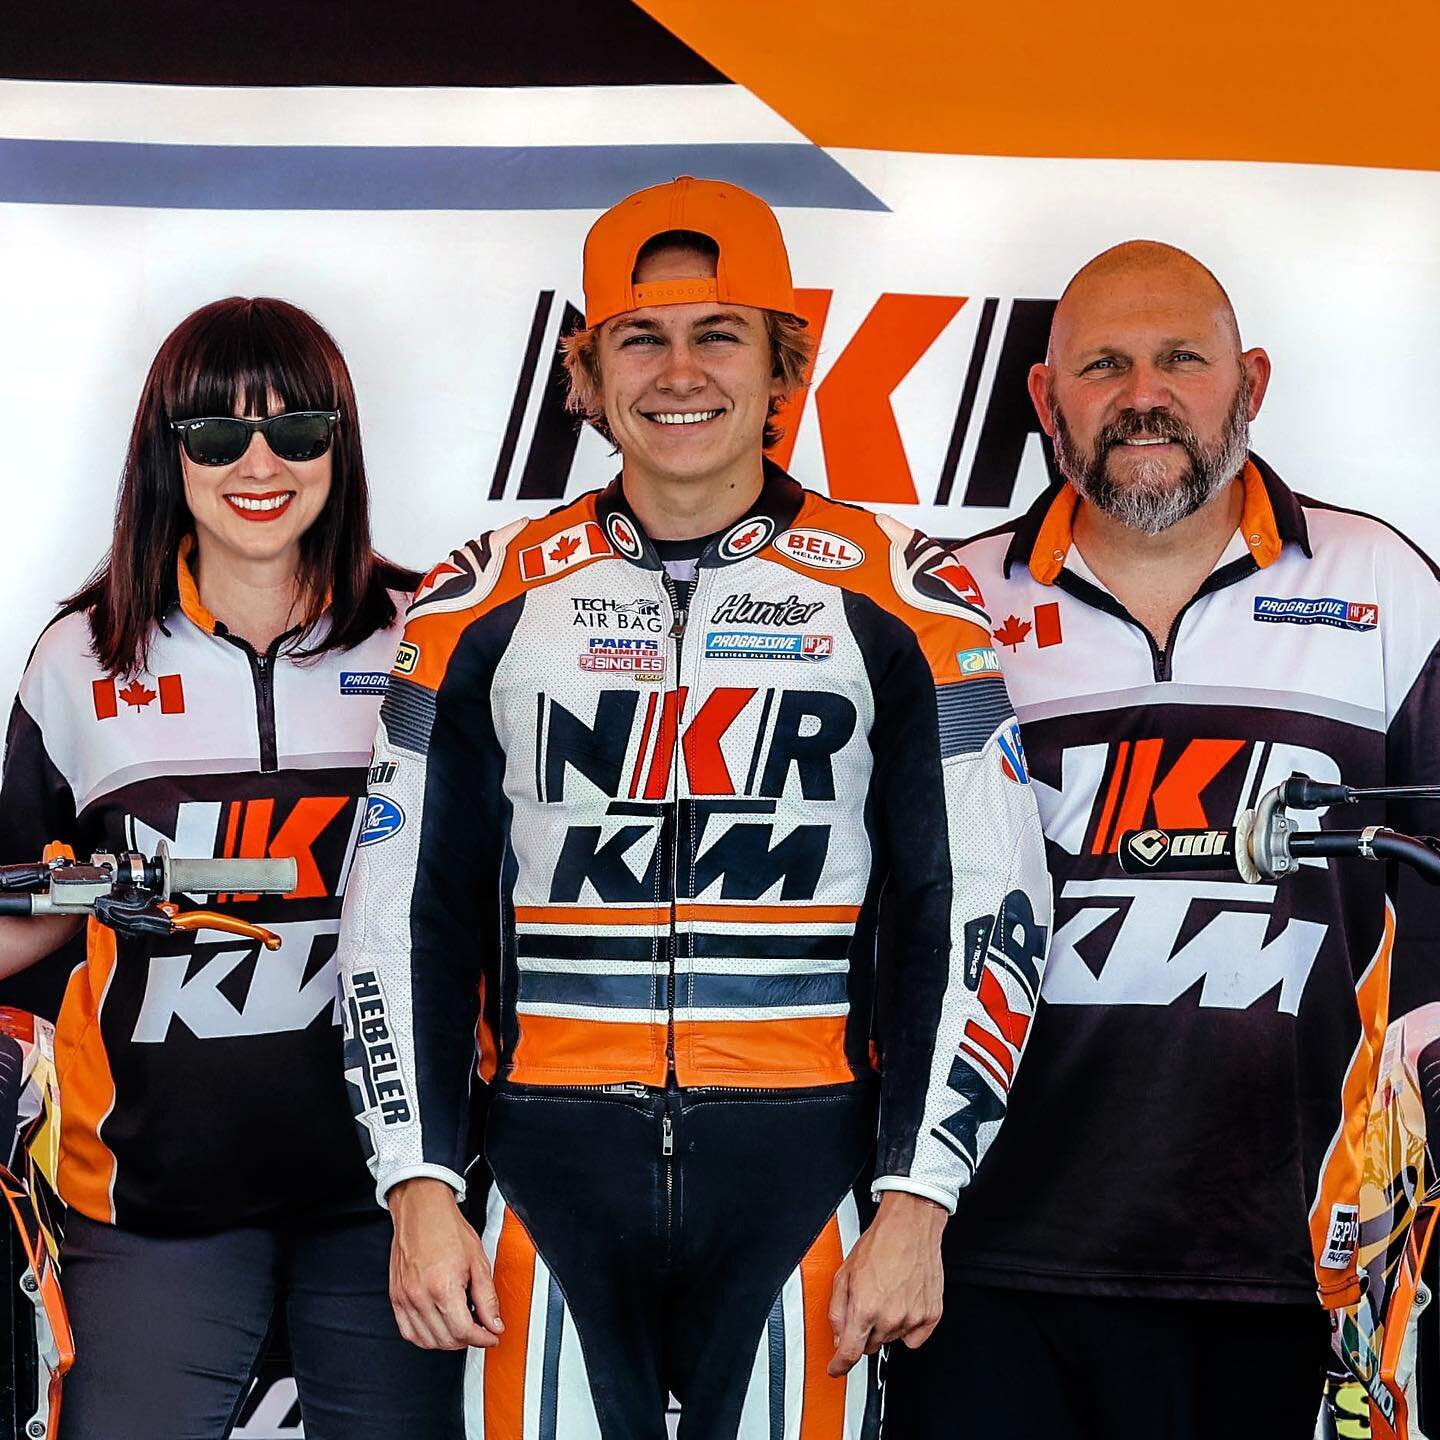 The NKR website has had a bit of a facelift! Take a tour and learn a bit more about the team and our sponsors, scope out the 2022 @americanflattrack race schedule and how to catch the action live, order some NKR merch, or contribute a few dollars to 